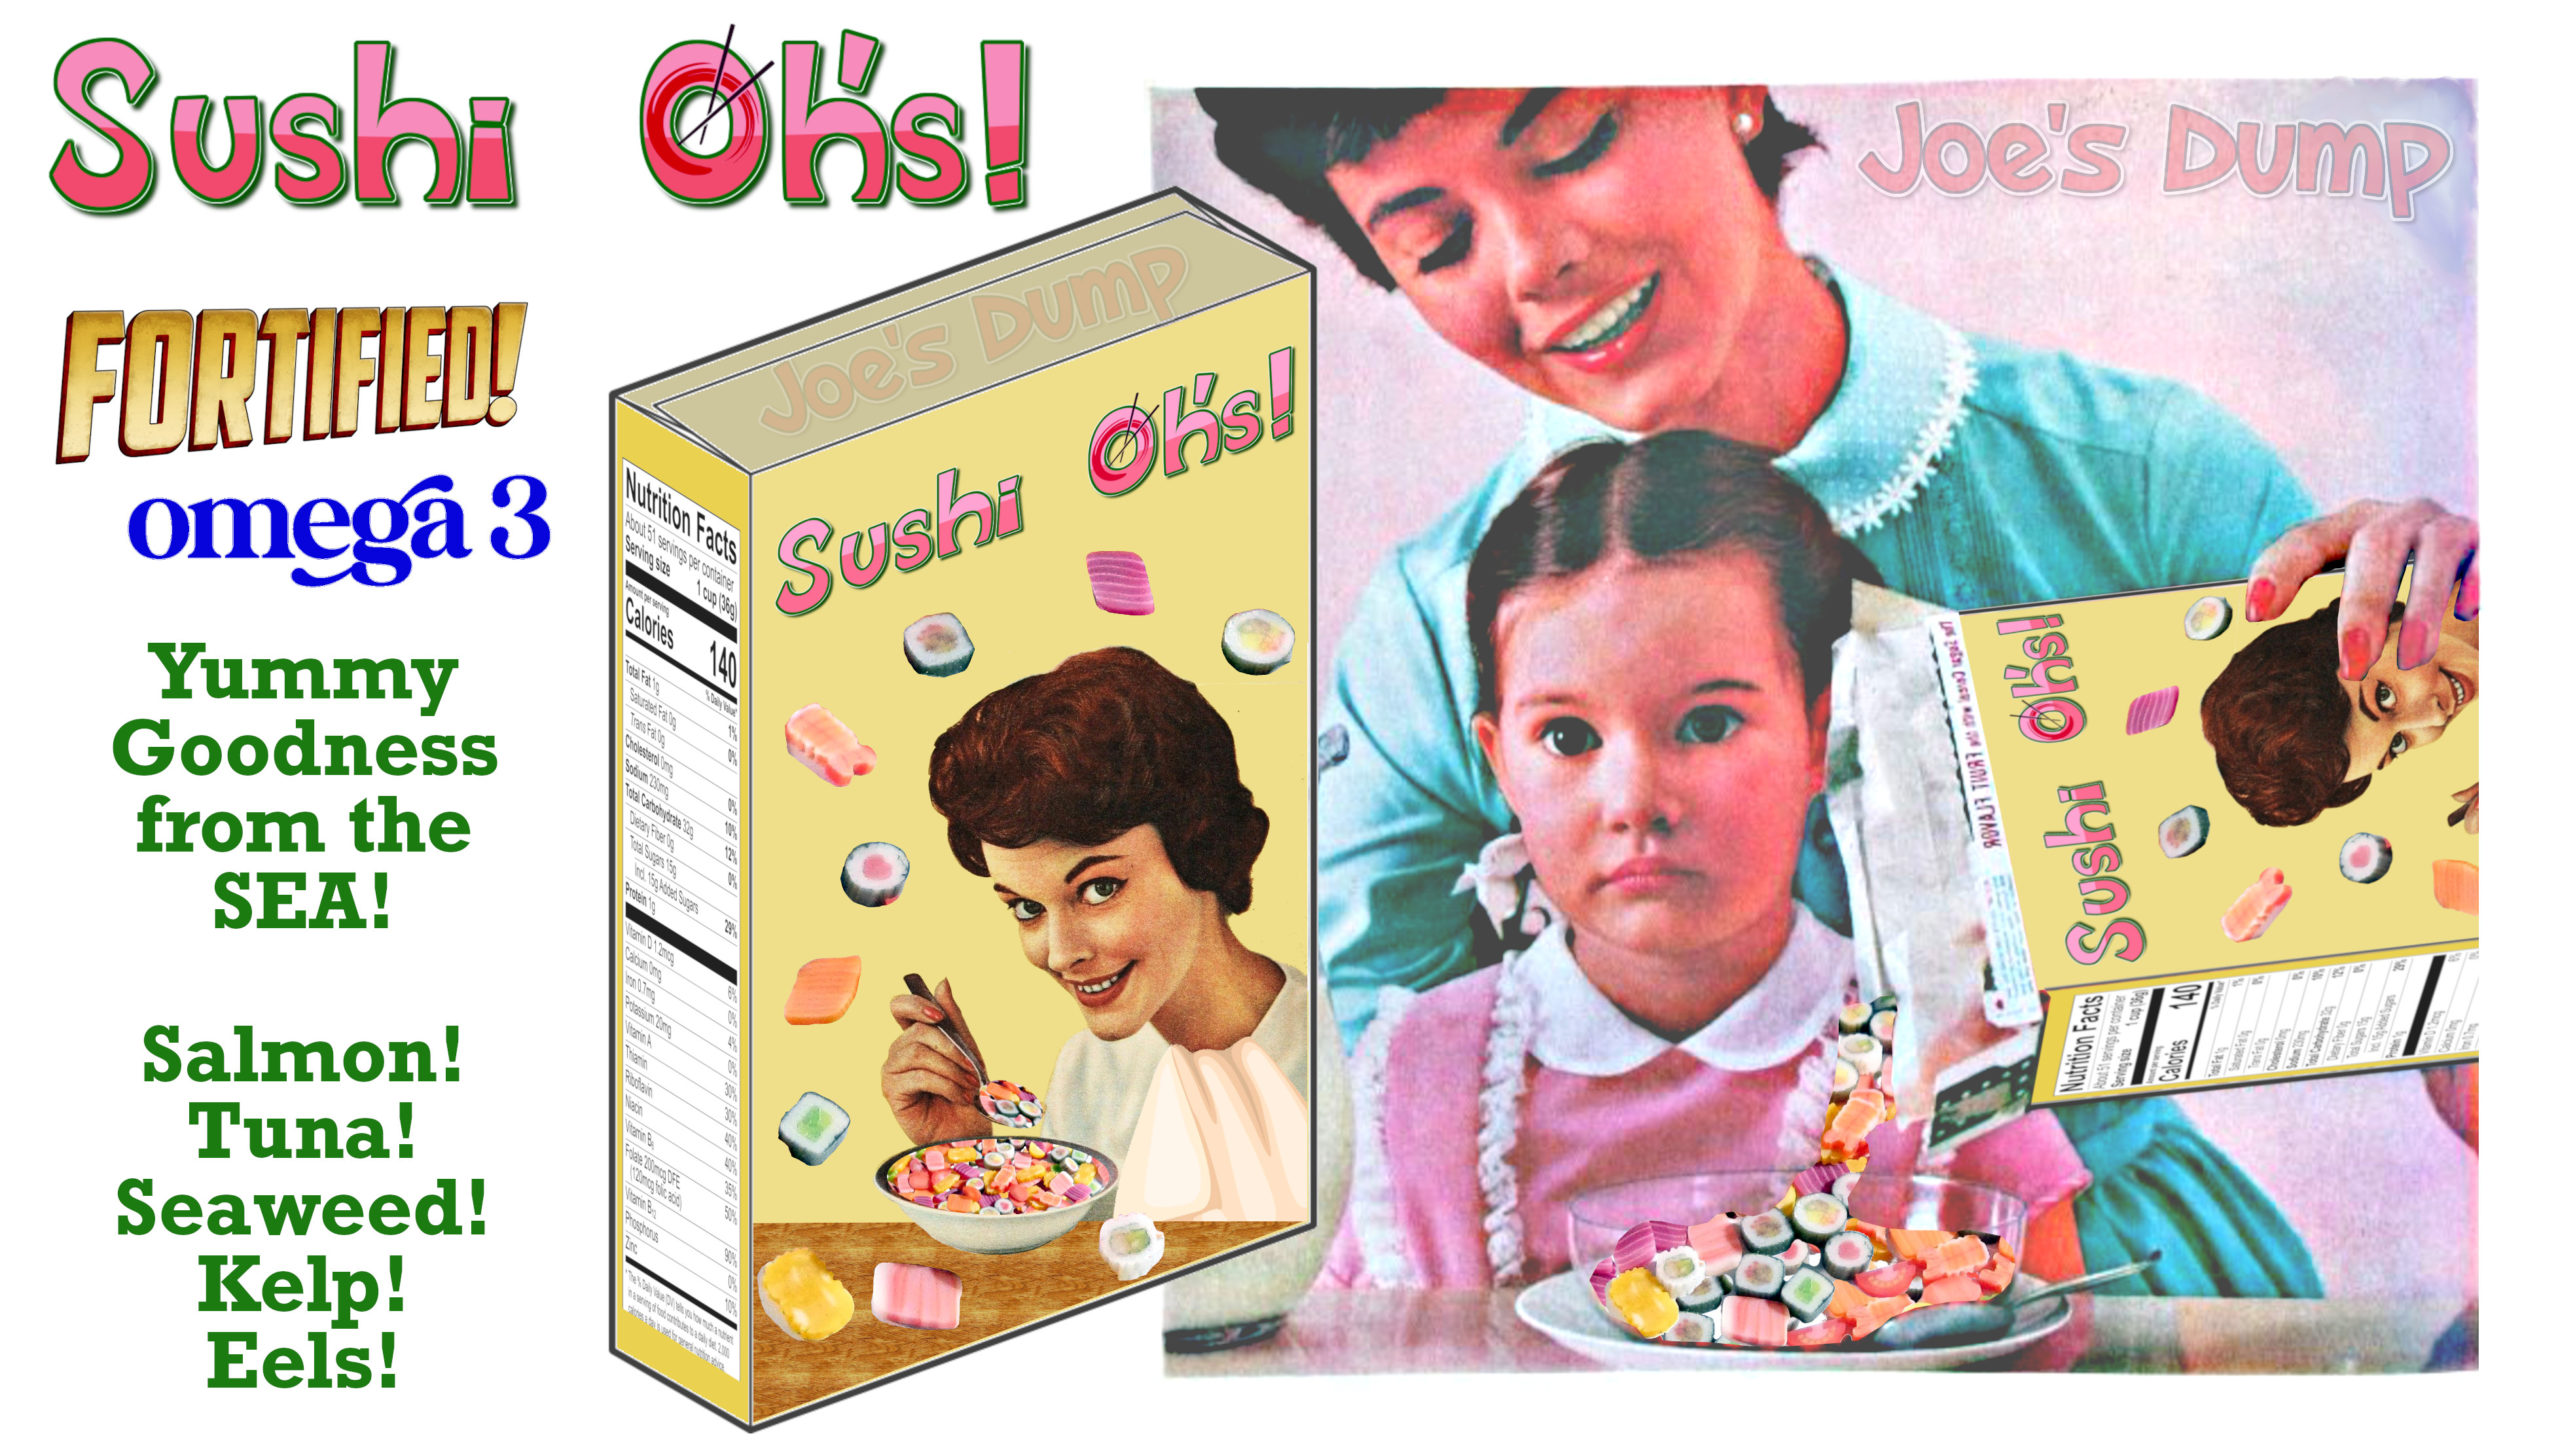 Sushi-Oh's! Cereal